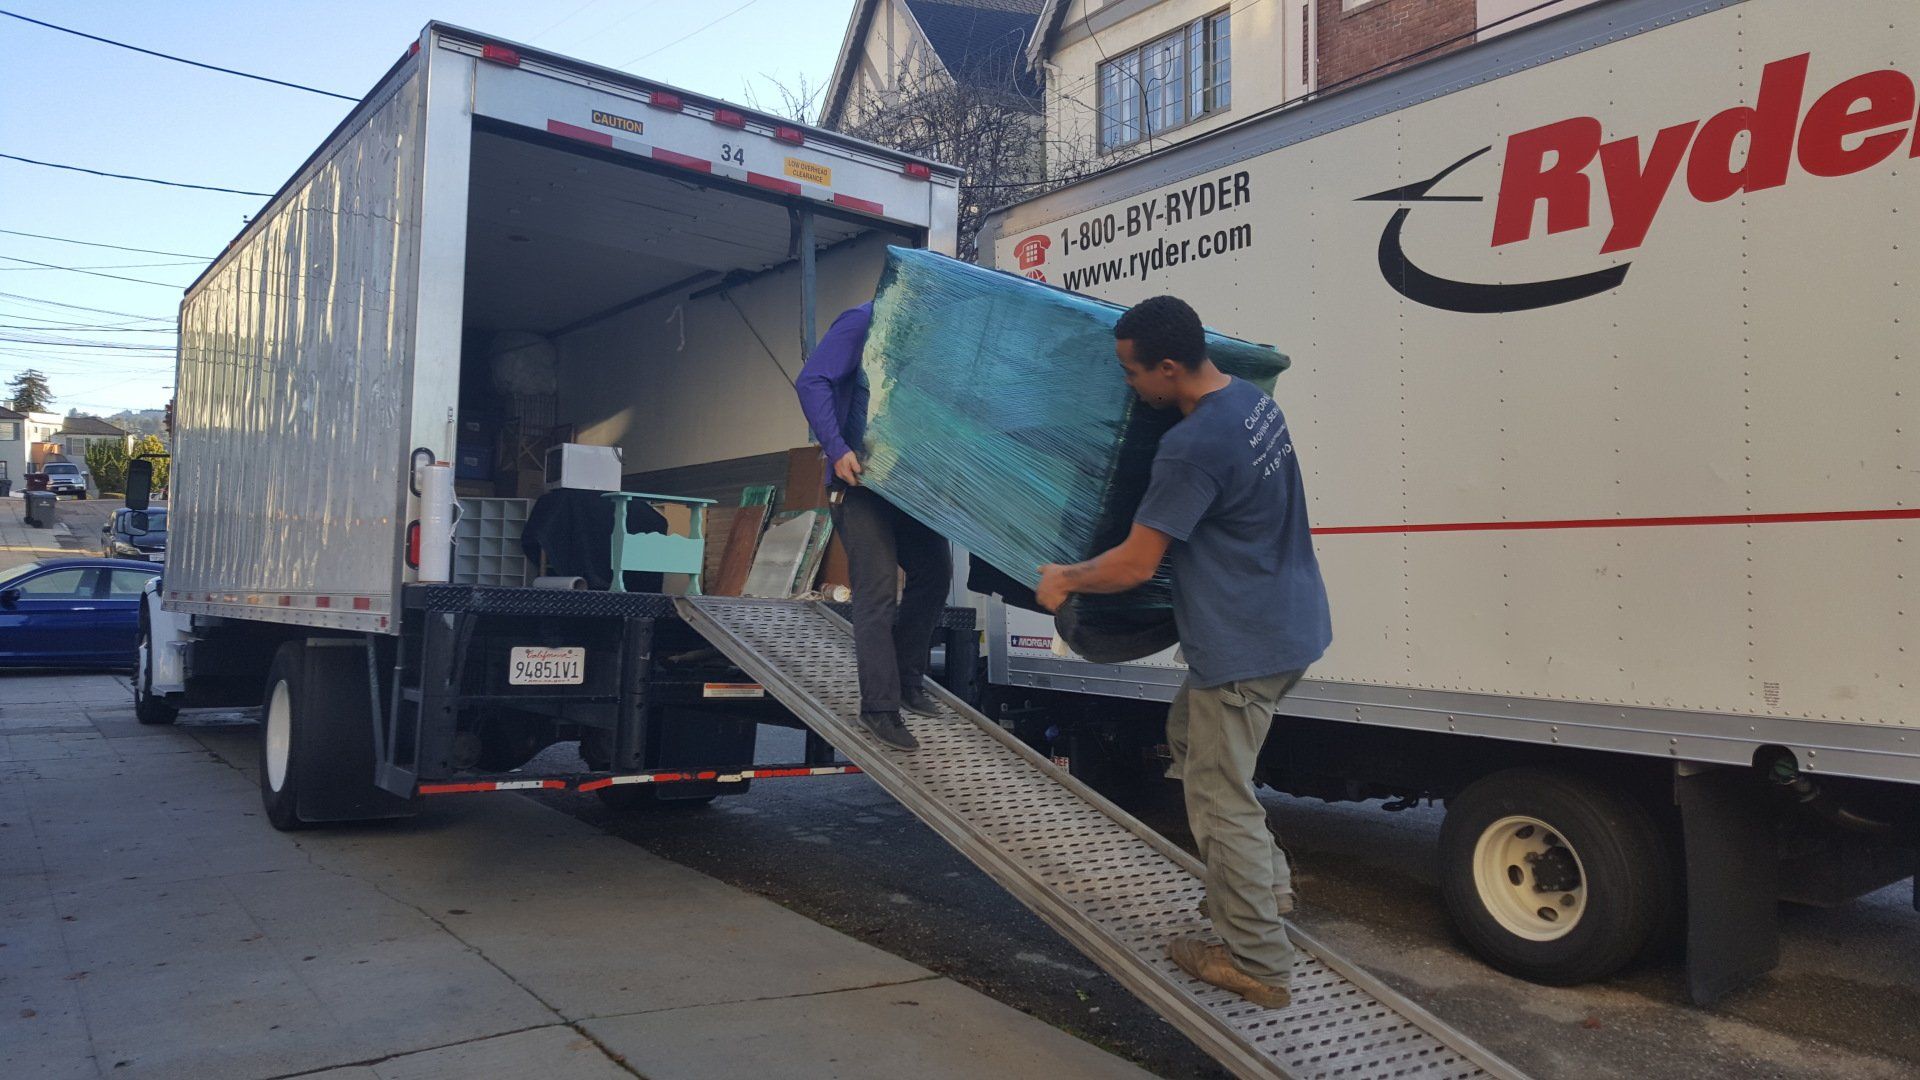 Movers Lifting Furniture Into Truck